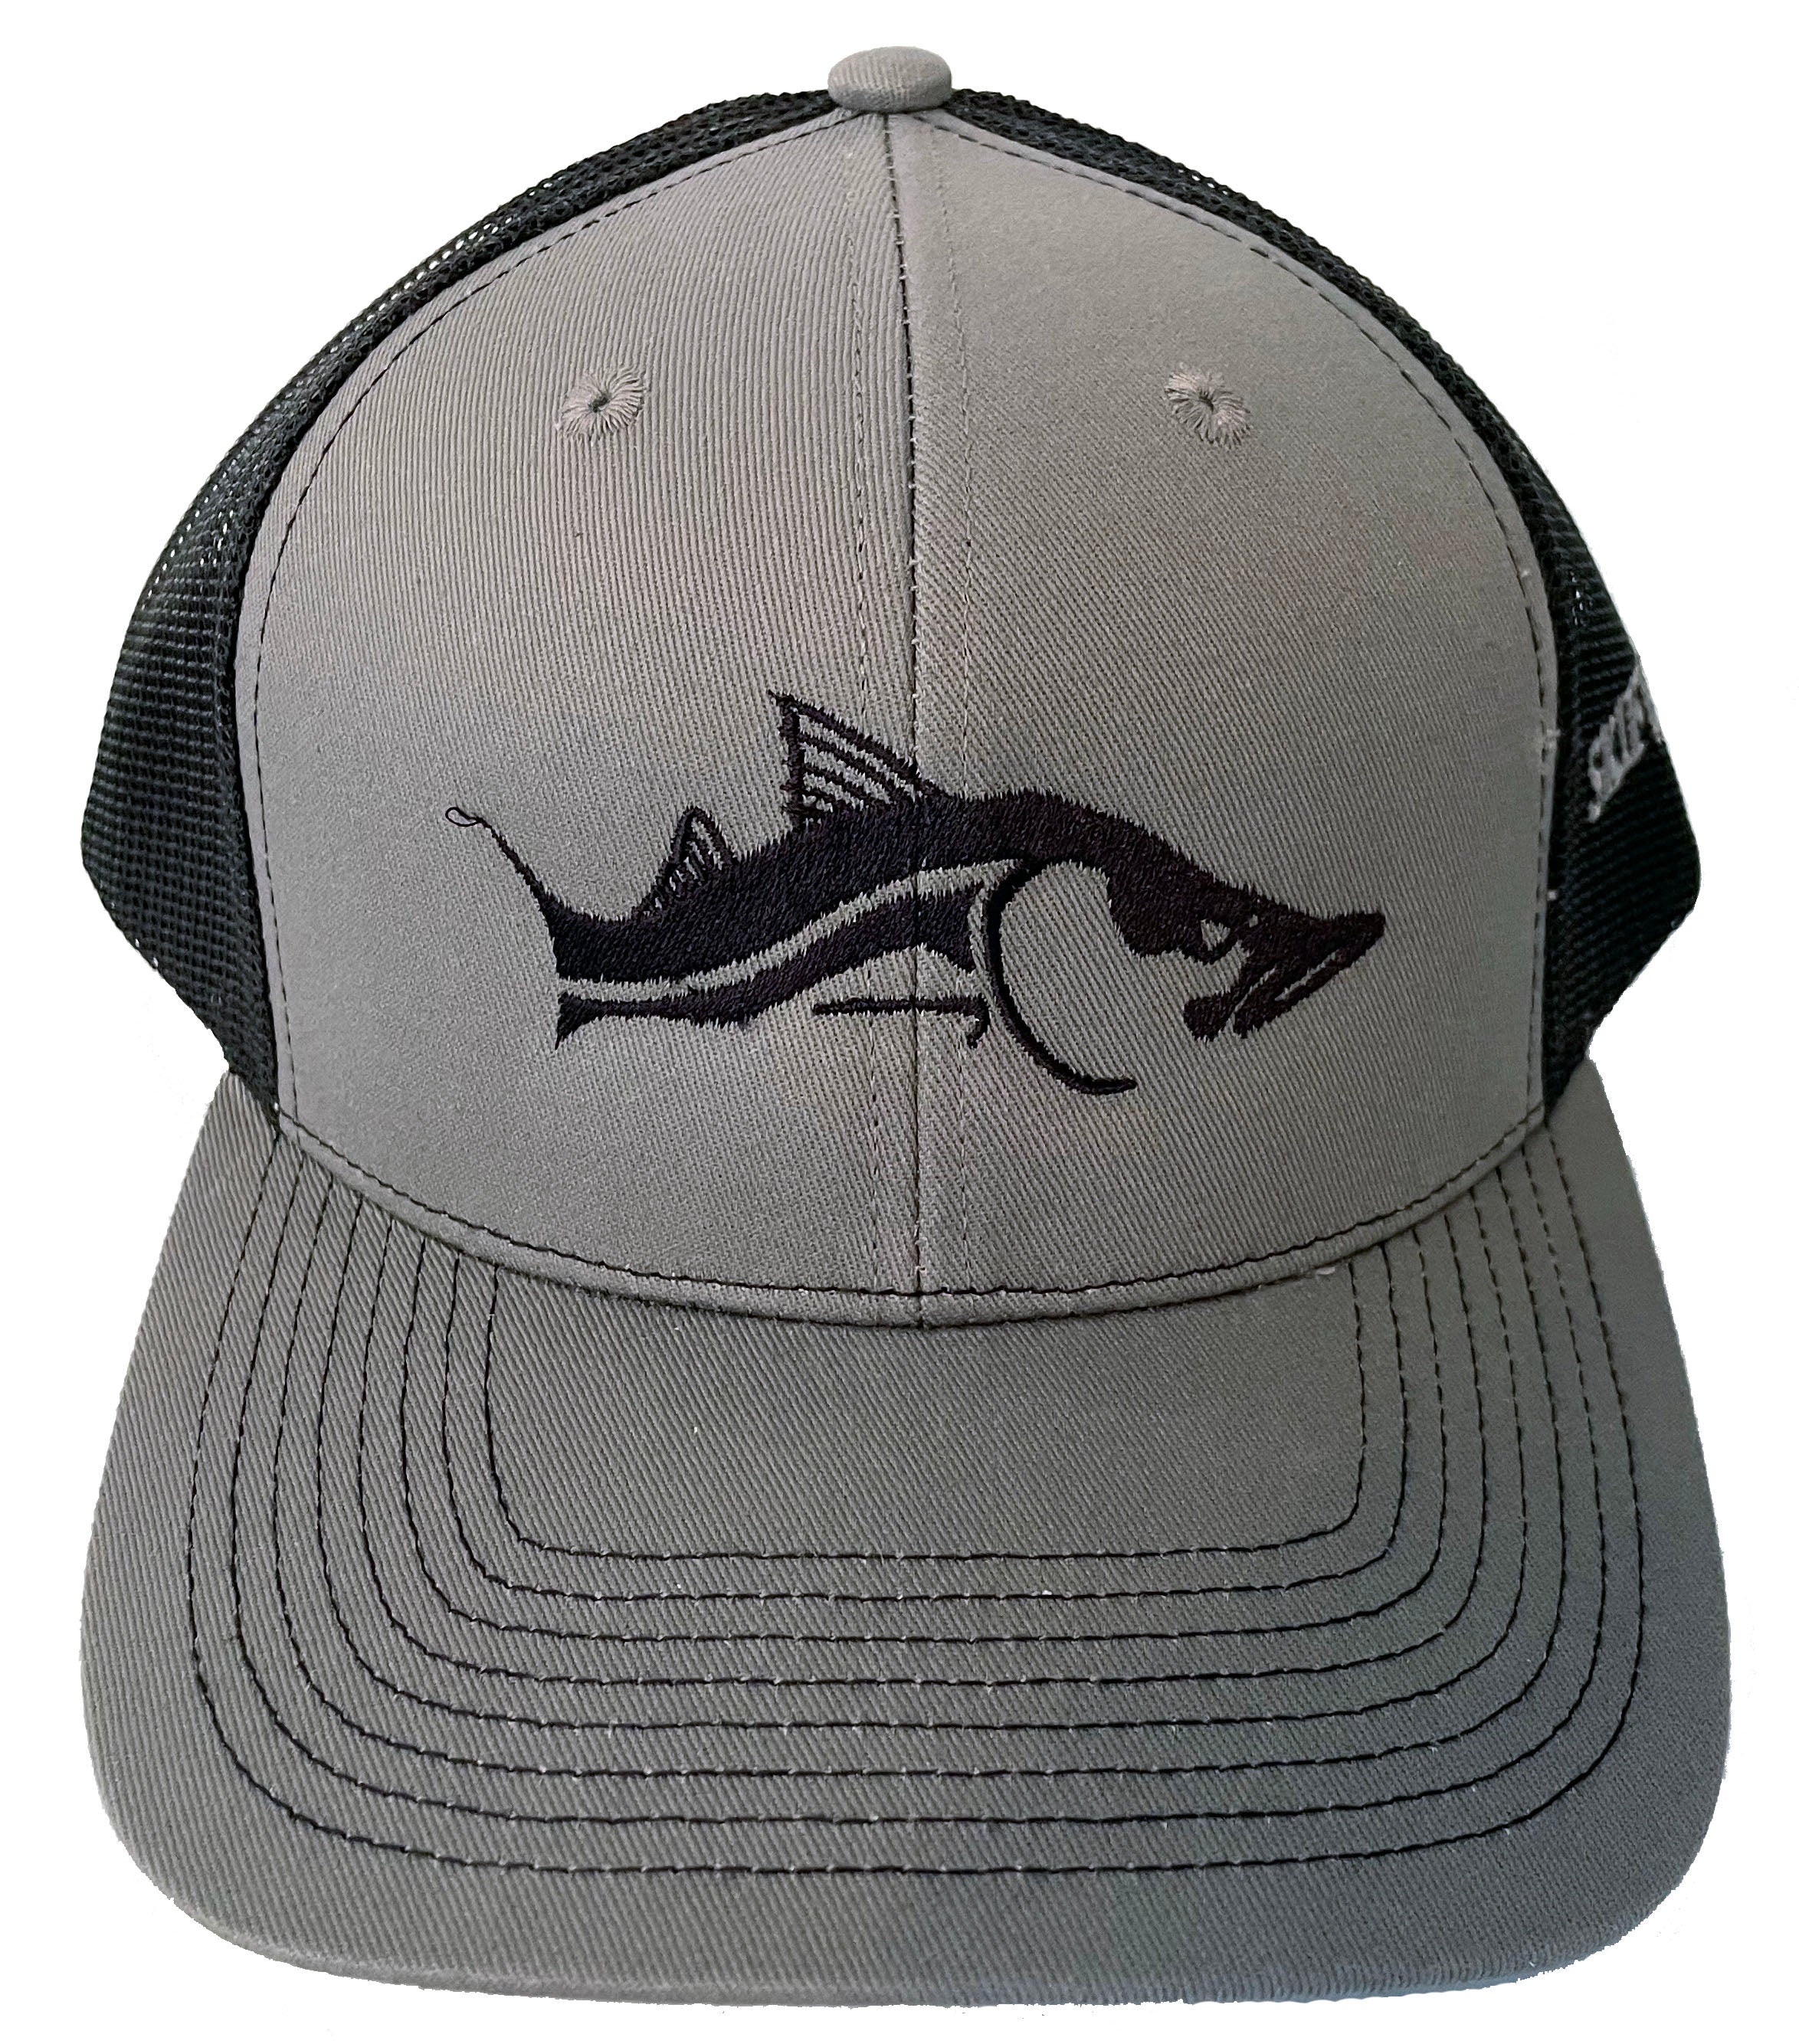 Snook Charcoal Gray Black Meshback Trucker Hats by Skiff Life